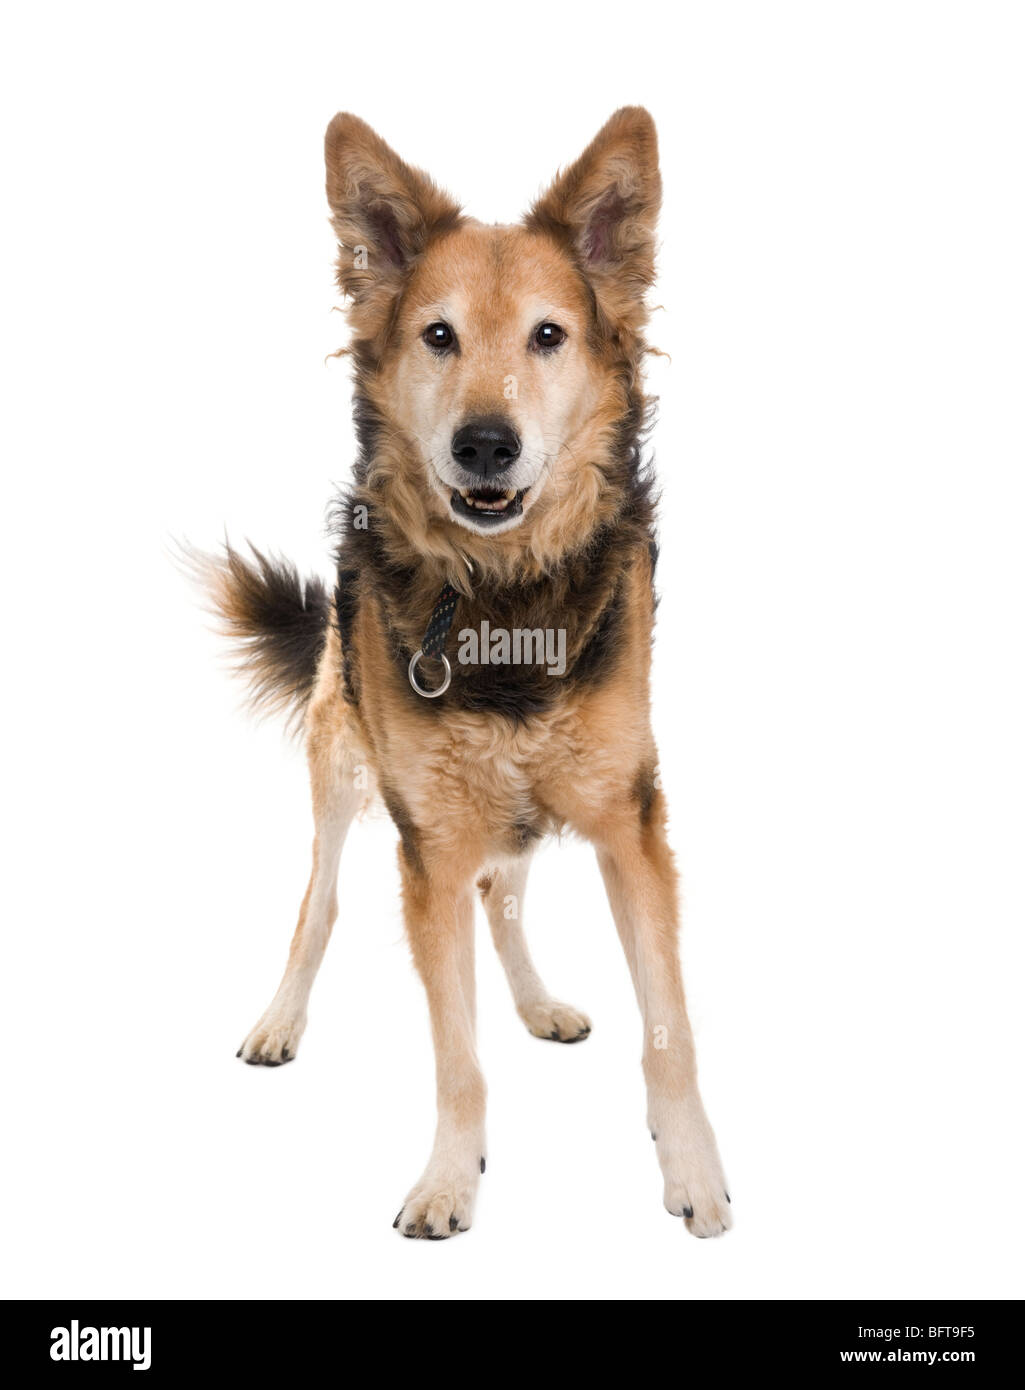 Cross-breed between a German Shepherd and a Scottish Shepherd, 9 months old, standing in front of white background Stock Photo